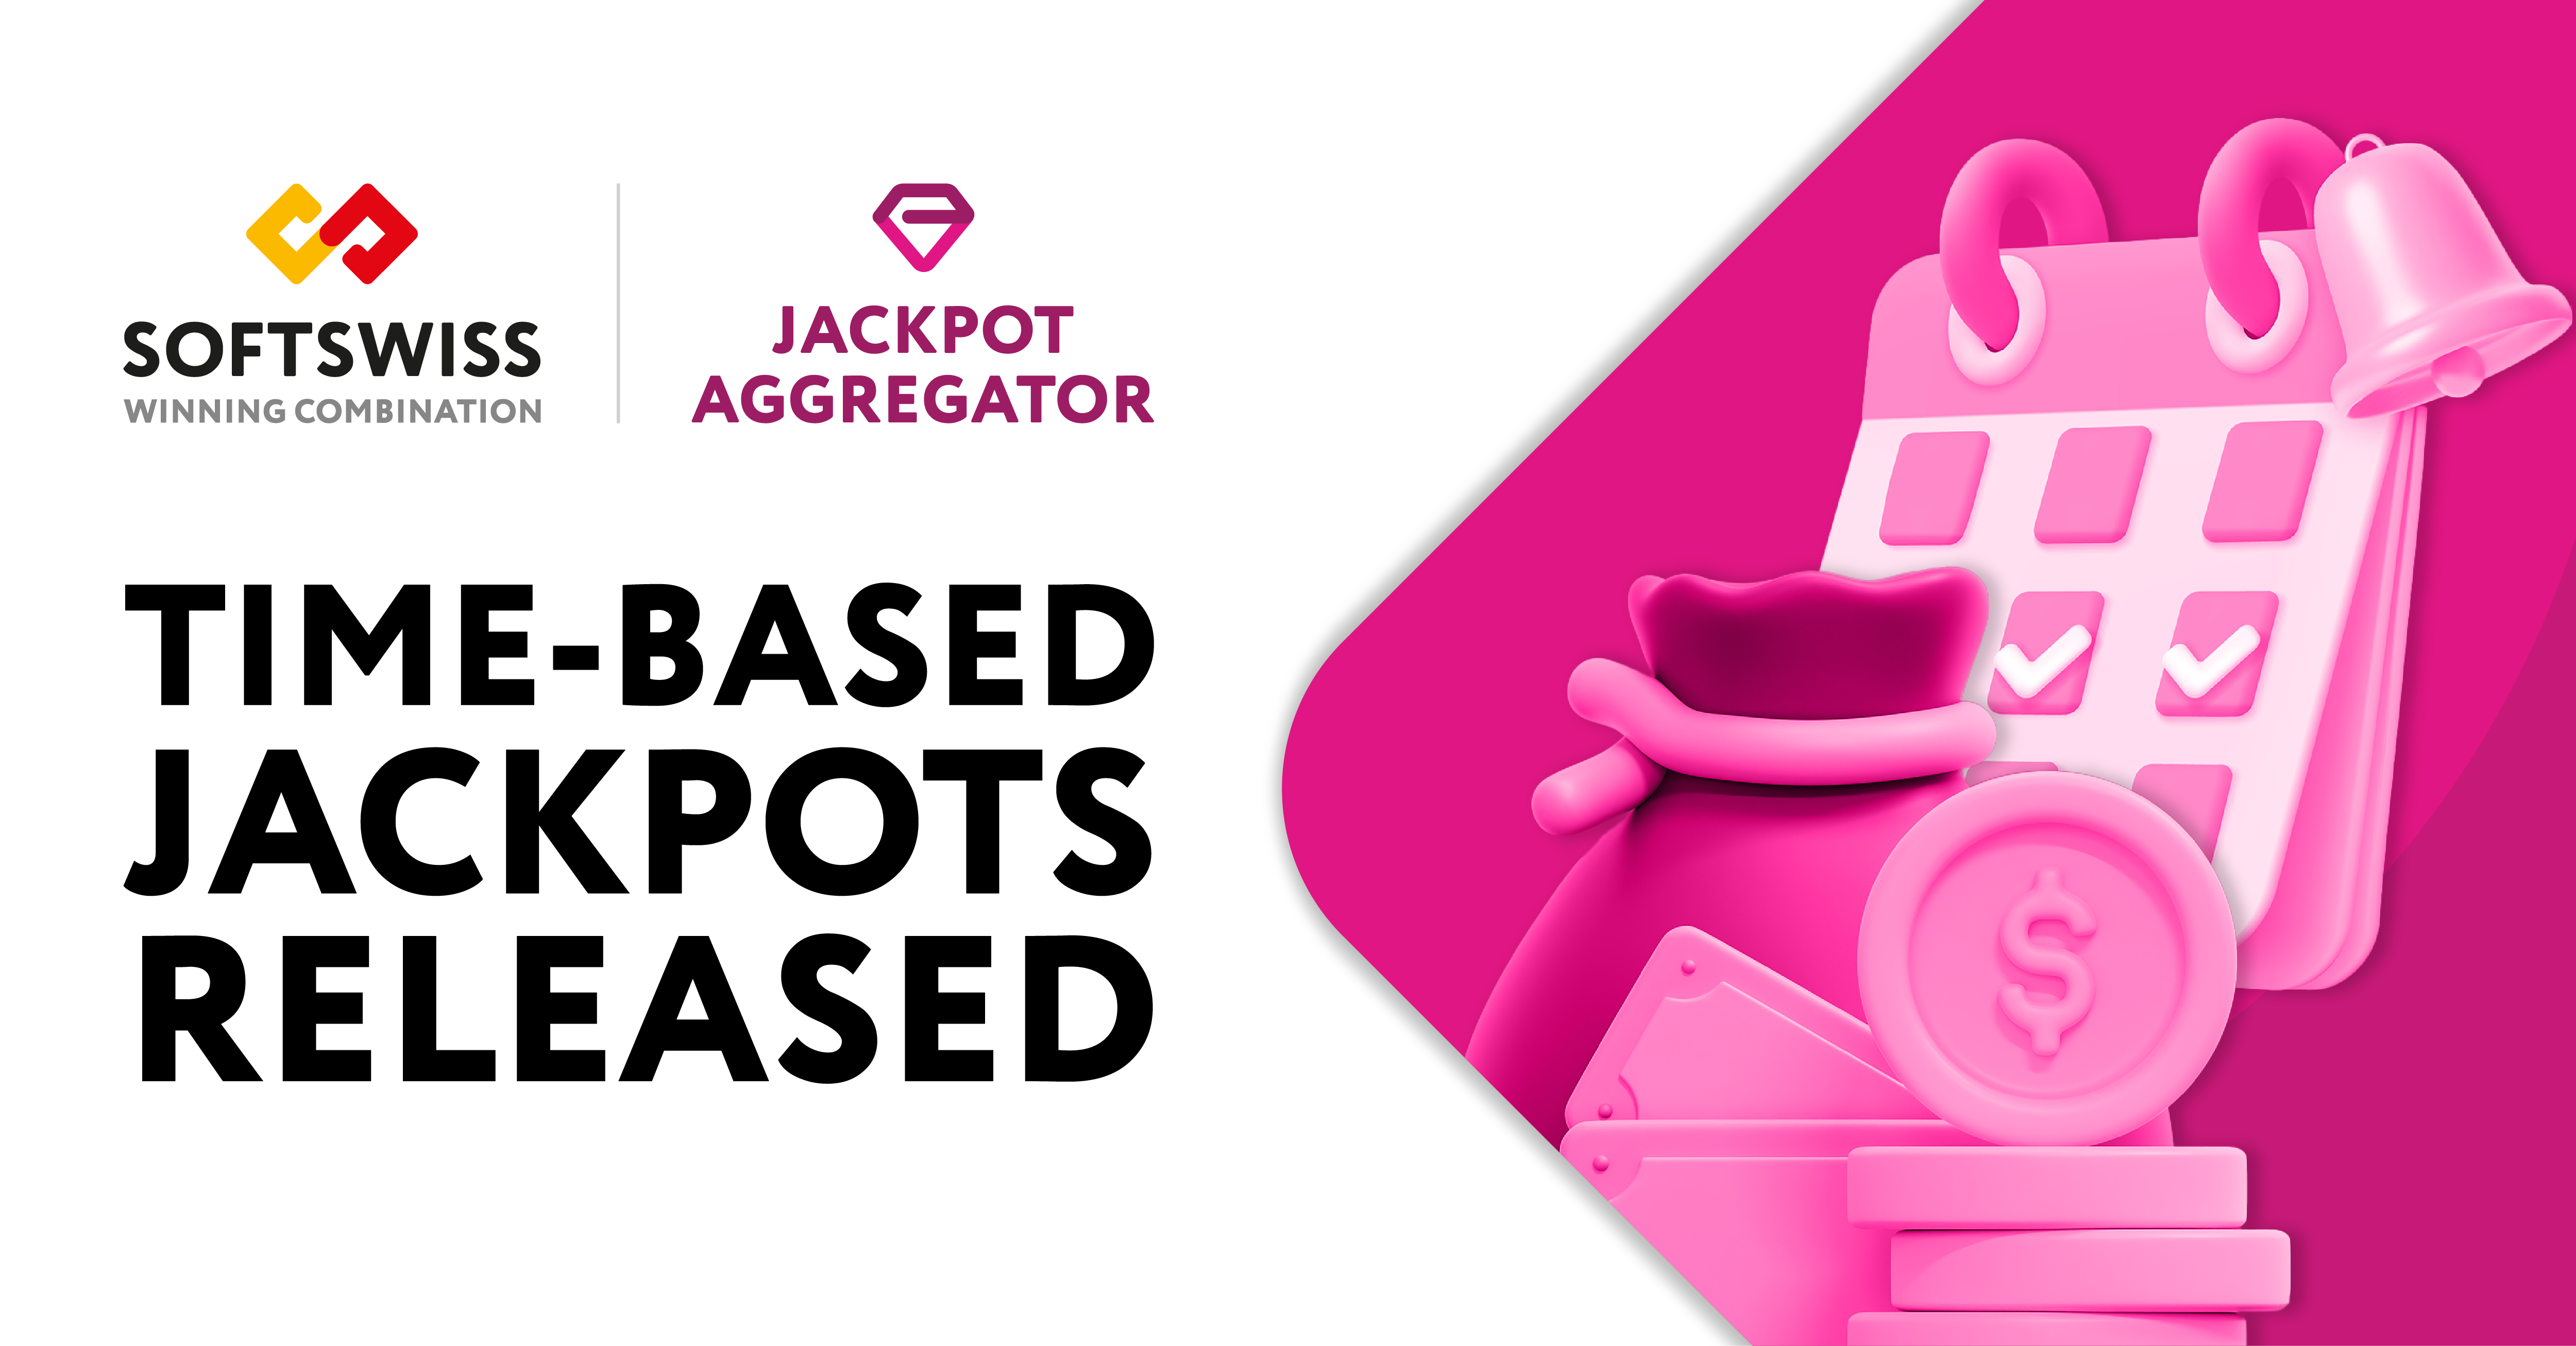 SOFTSWISS Jackpot Aggregator Introduces Time-Based Jackpots